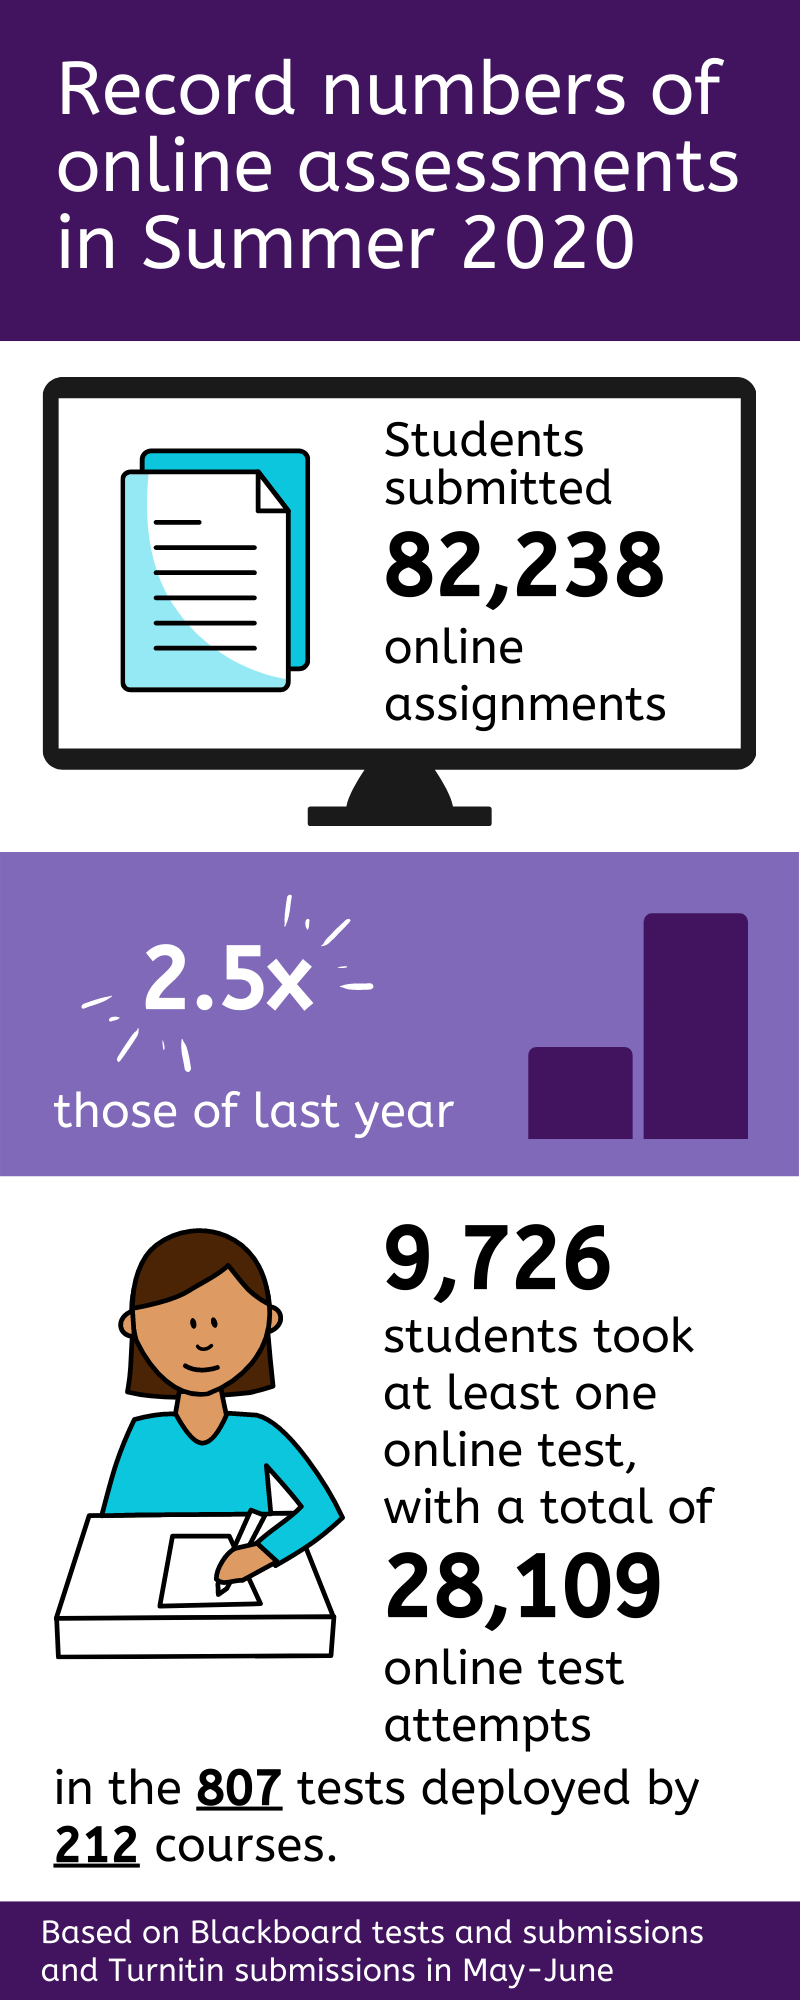 Record numbers of online assessments in Summer 2020. Students submitted 82238 online assignments, 2.5 times those of last year. 9726 students took at least 1 online test, with a total of 28109 online test attempts in the 807 tests deployed by 212 courses. Based on blackboard tests & submissions and Turnitin submissions in May-June.